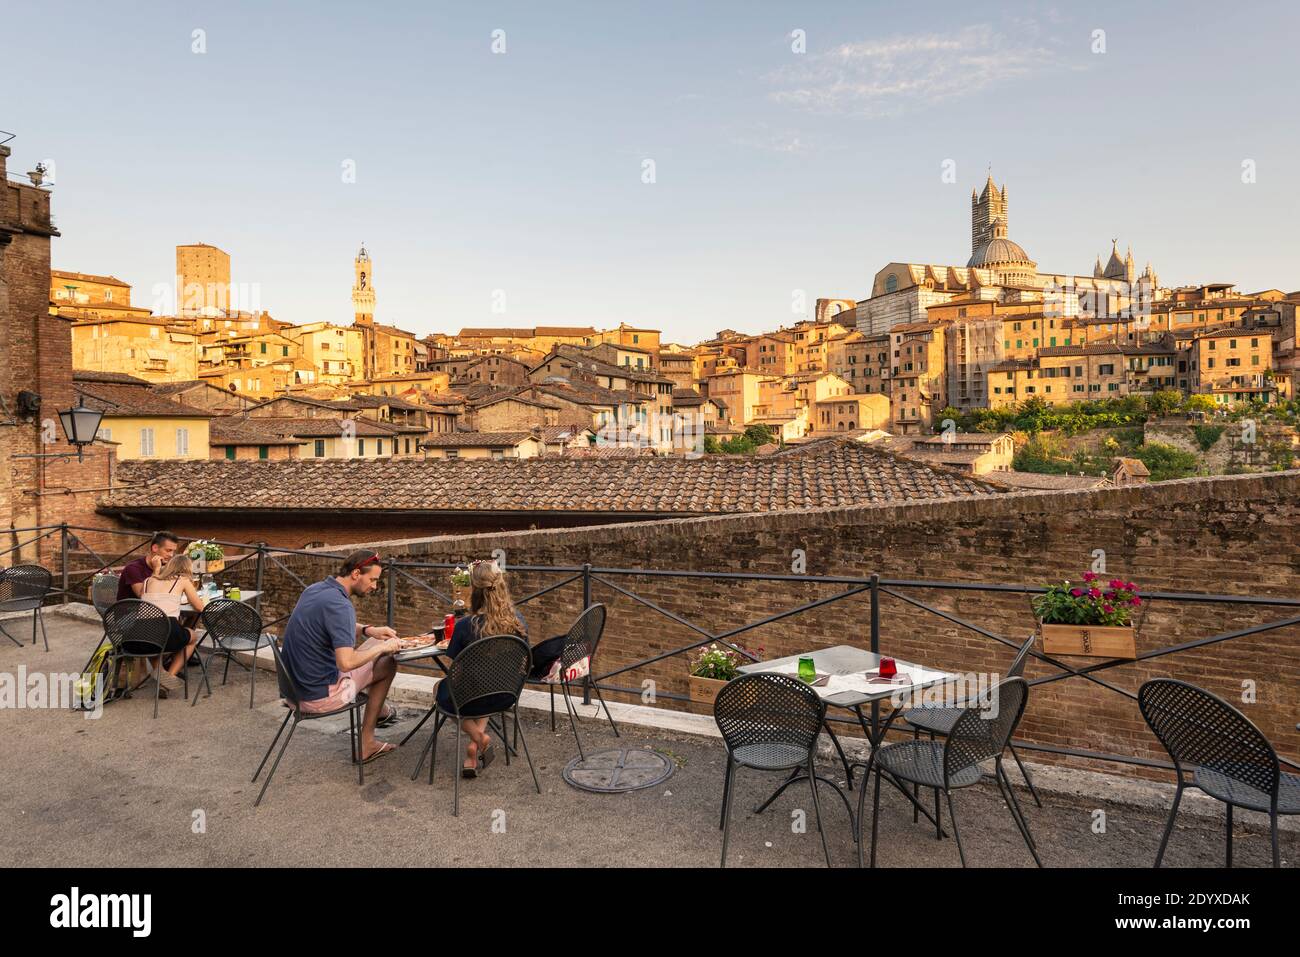 Young couples dining on the terrace of a restaurant overlooking the medieval old town of Siena in the evening sun, Tuscany, Italy Stock Photo